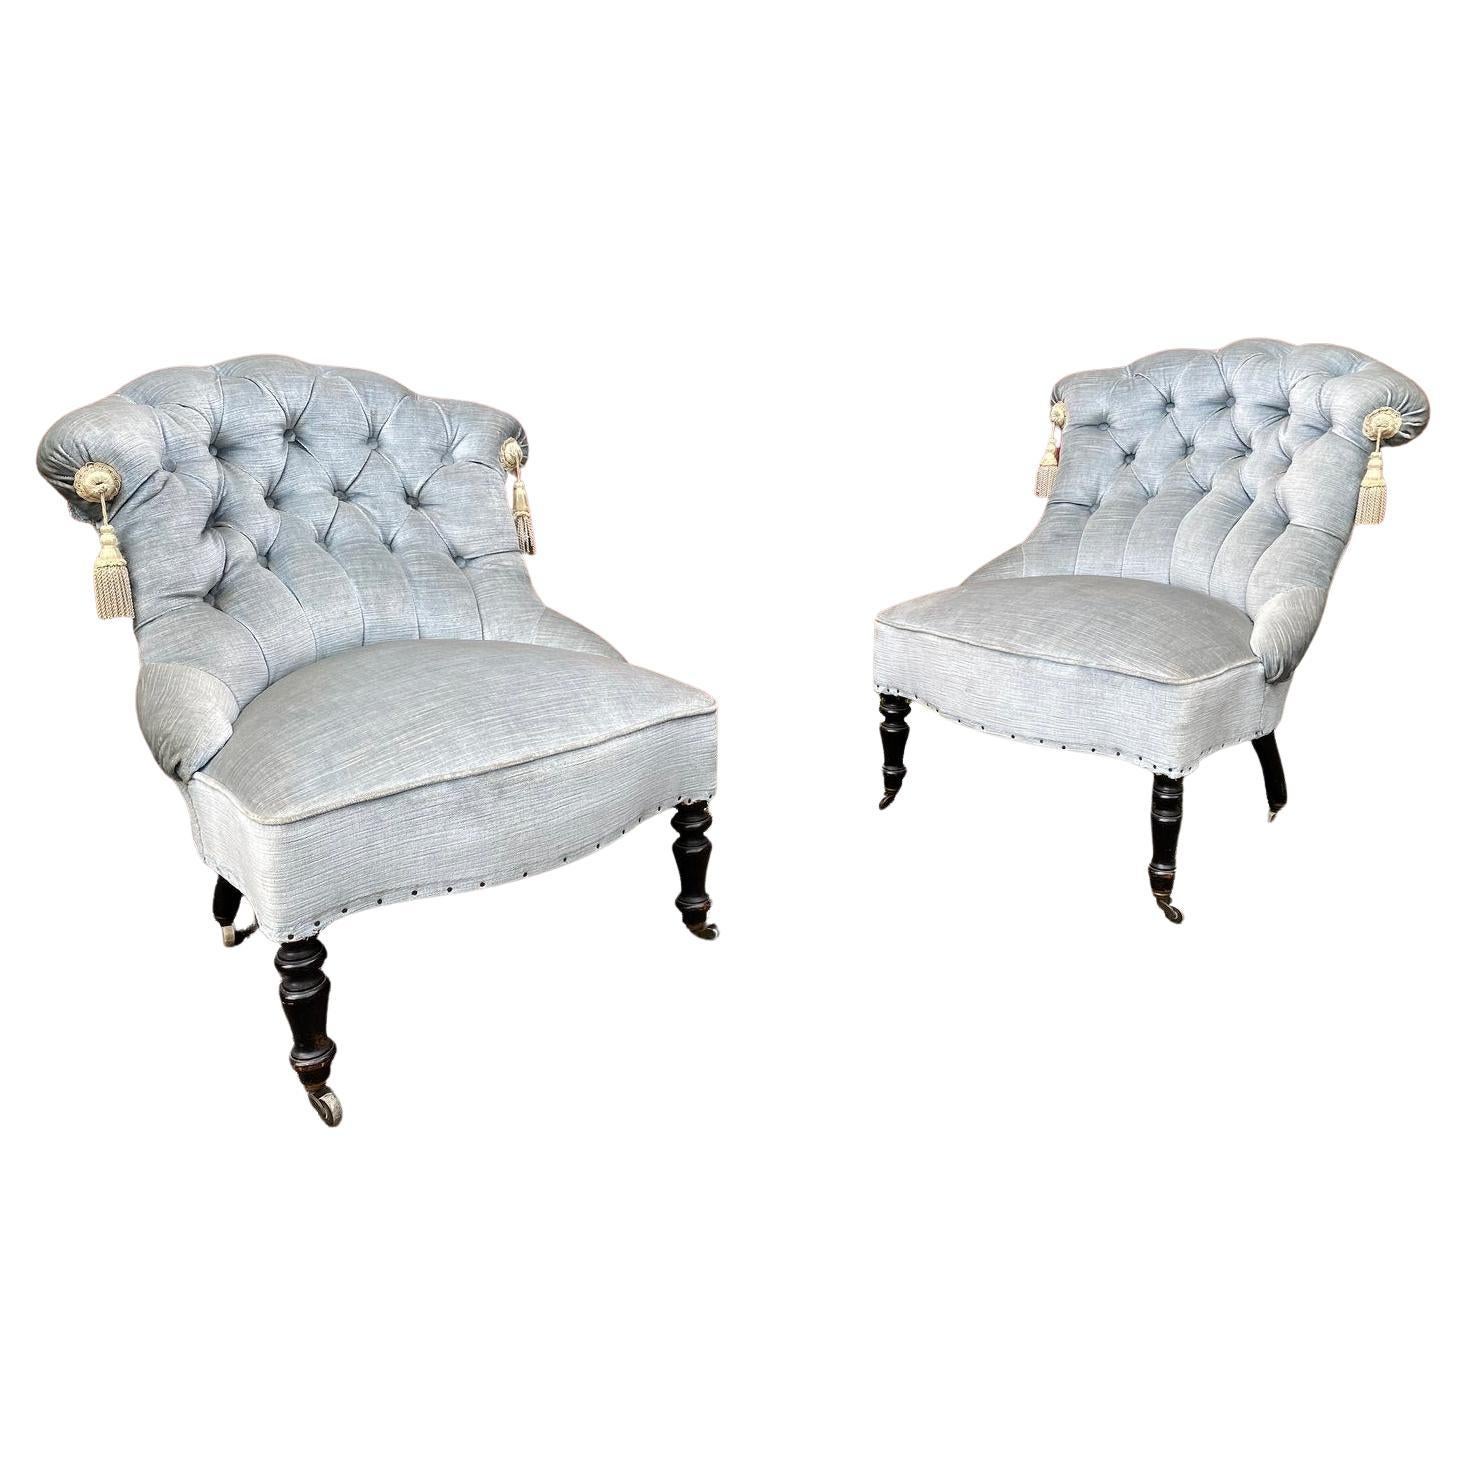 Pair of Small Napoleon III Tufted Slipper Chairs